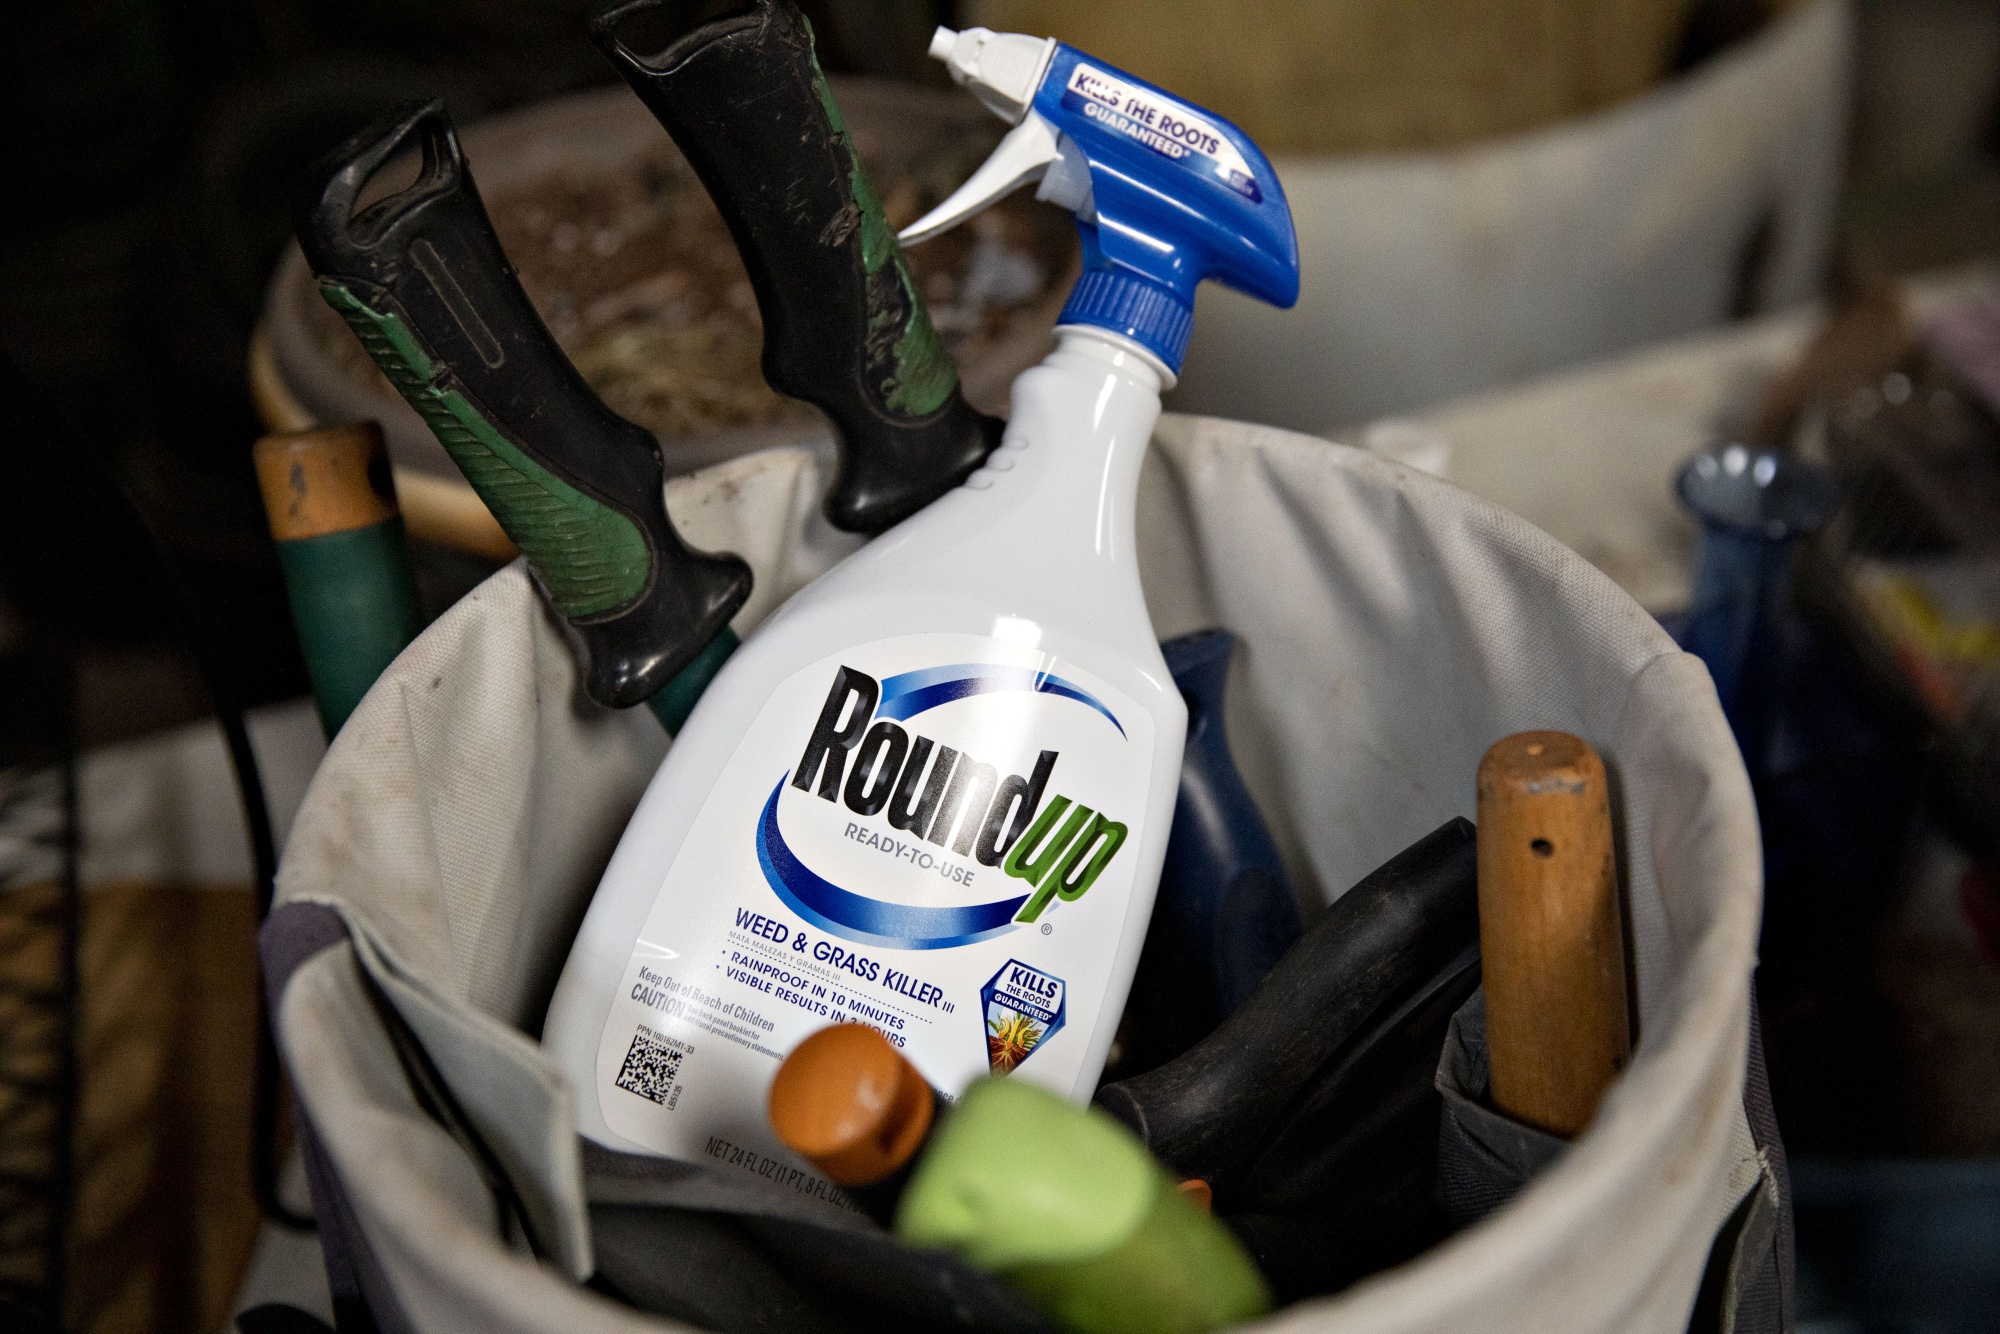 Glyphosate: What Is Roundup? Why Is the Bayer Weedkiller So Controversial?  - Bloomberg